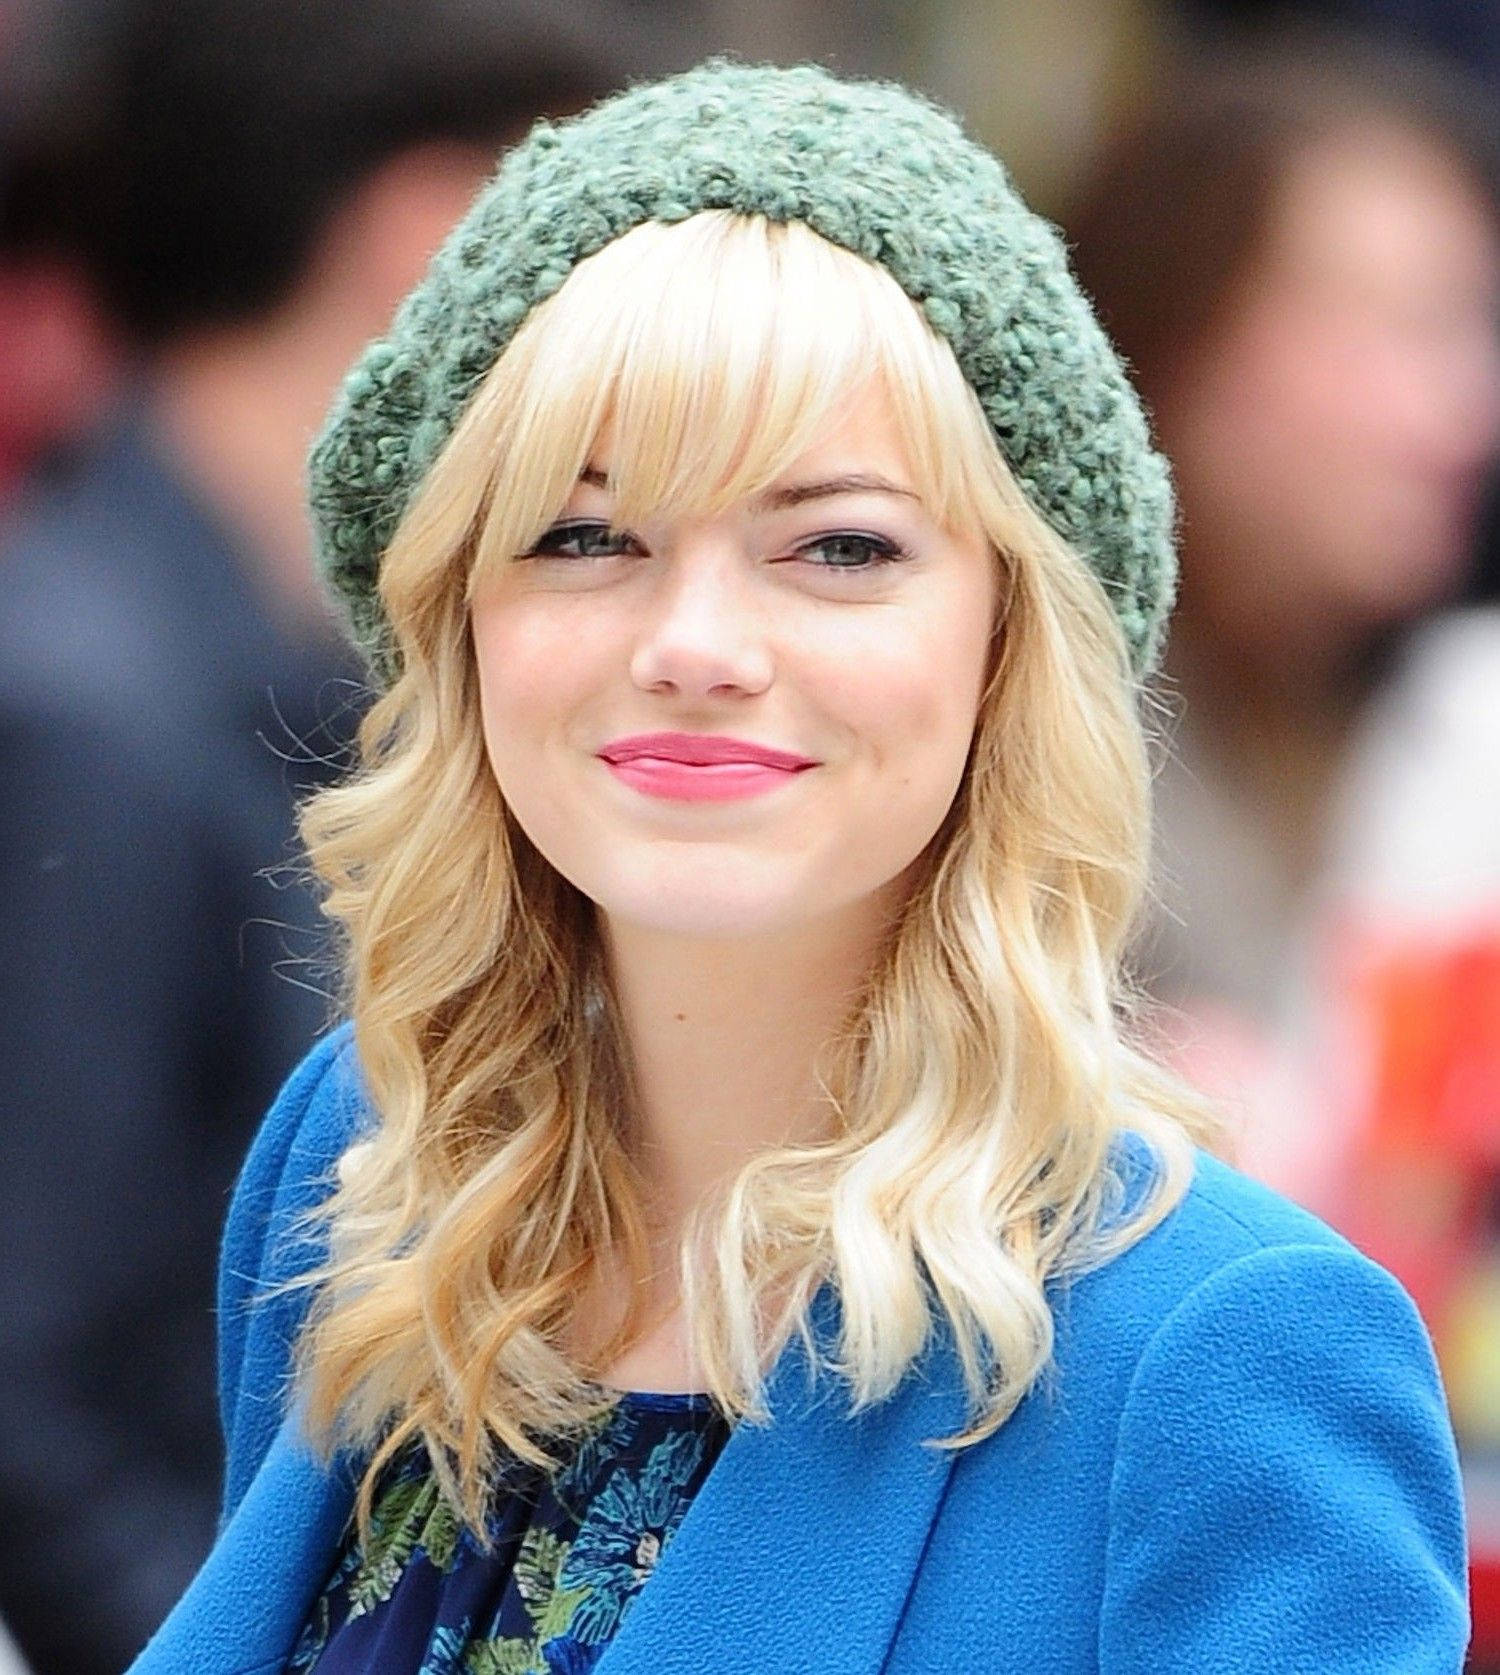 Emma Stone Exudes Confidence In A Classic Military Inspired Look. Background